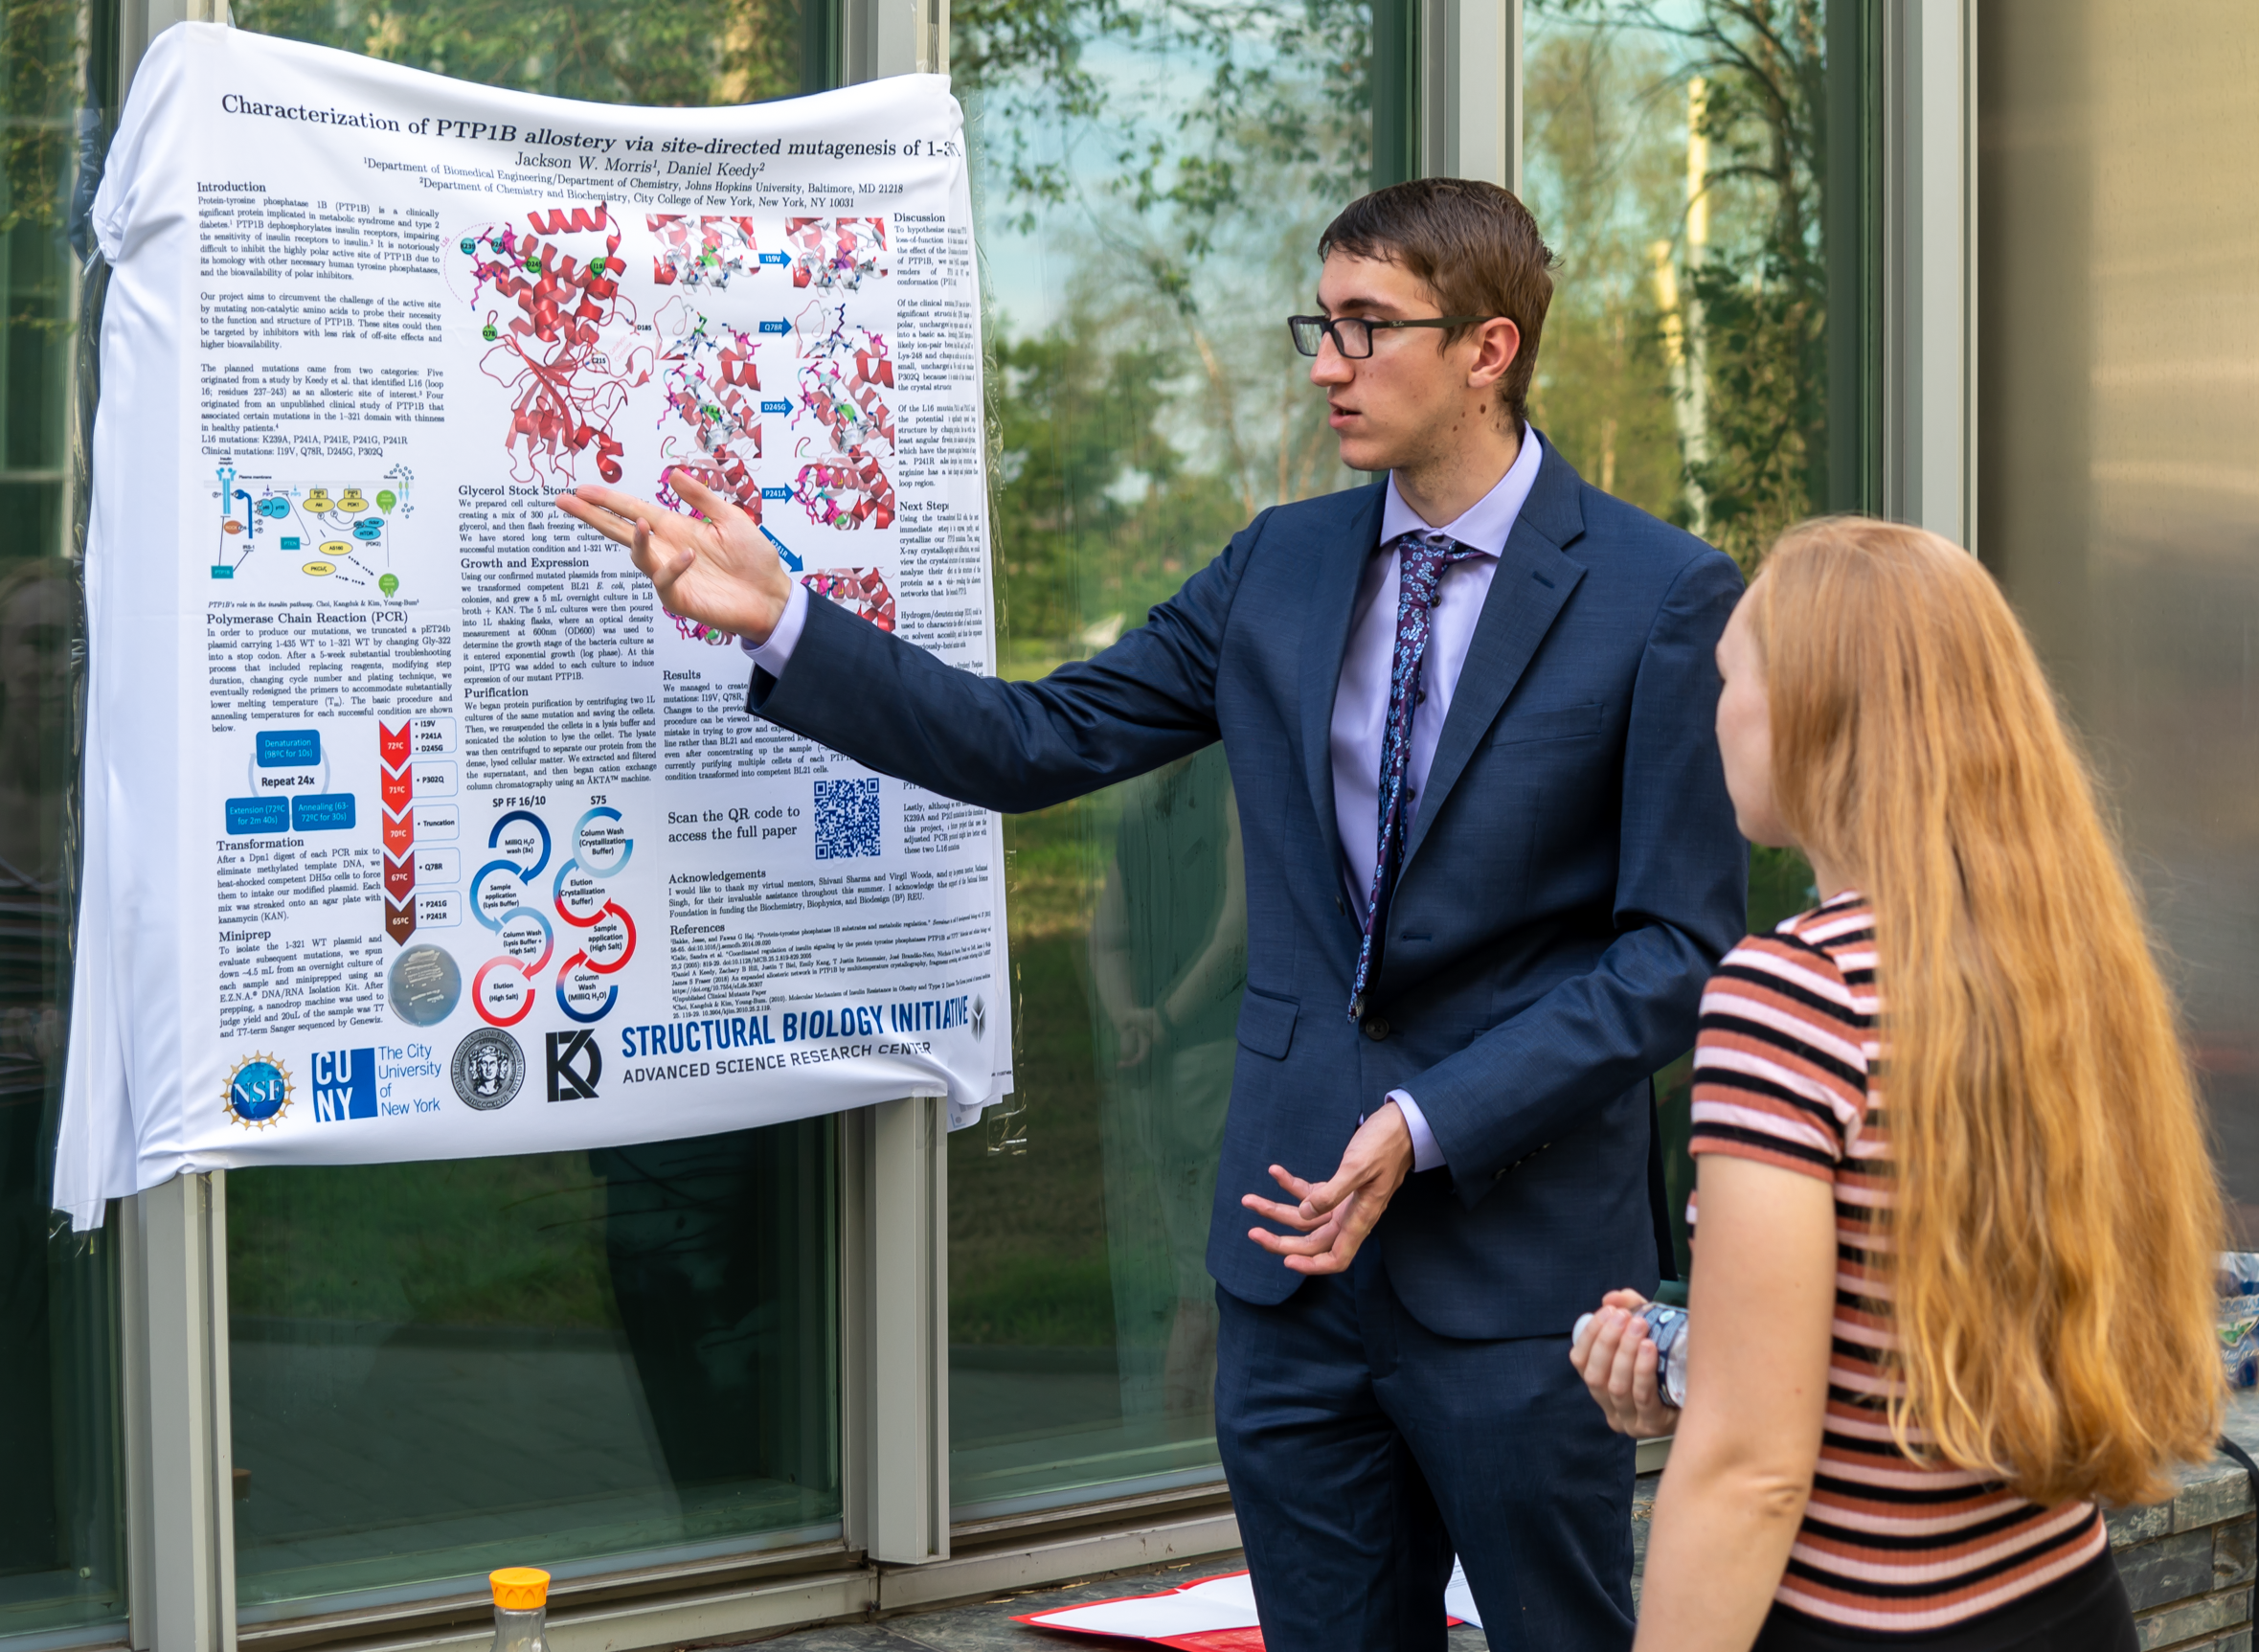 Jackson shows off his REU research poster